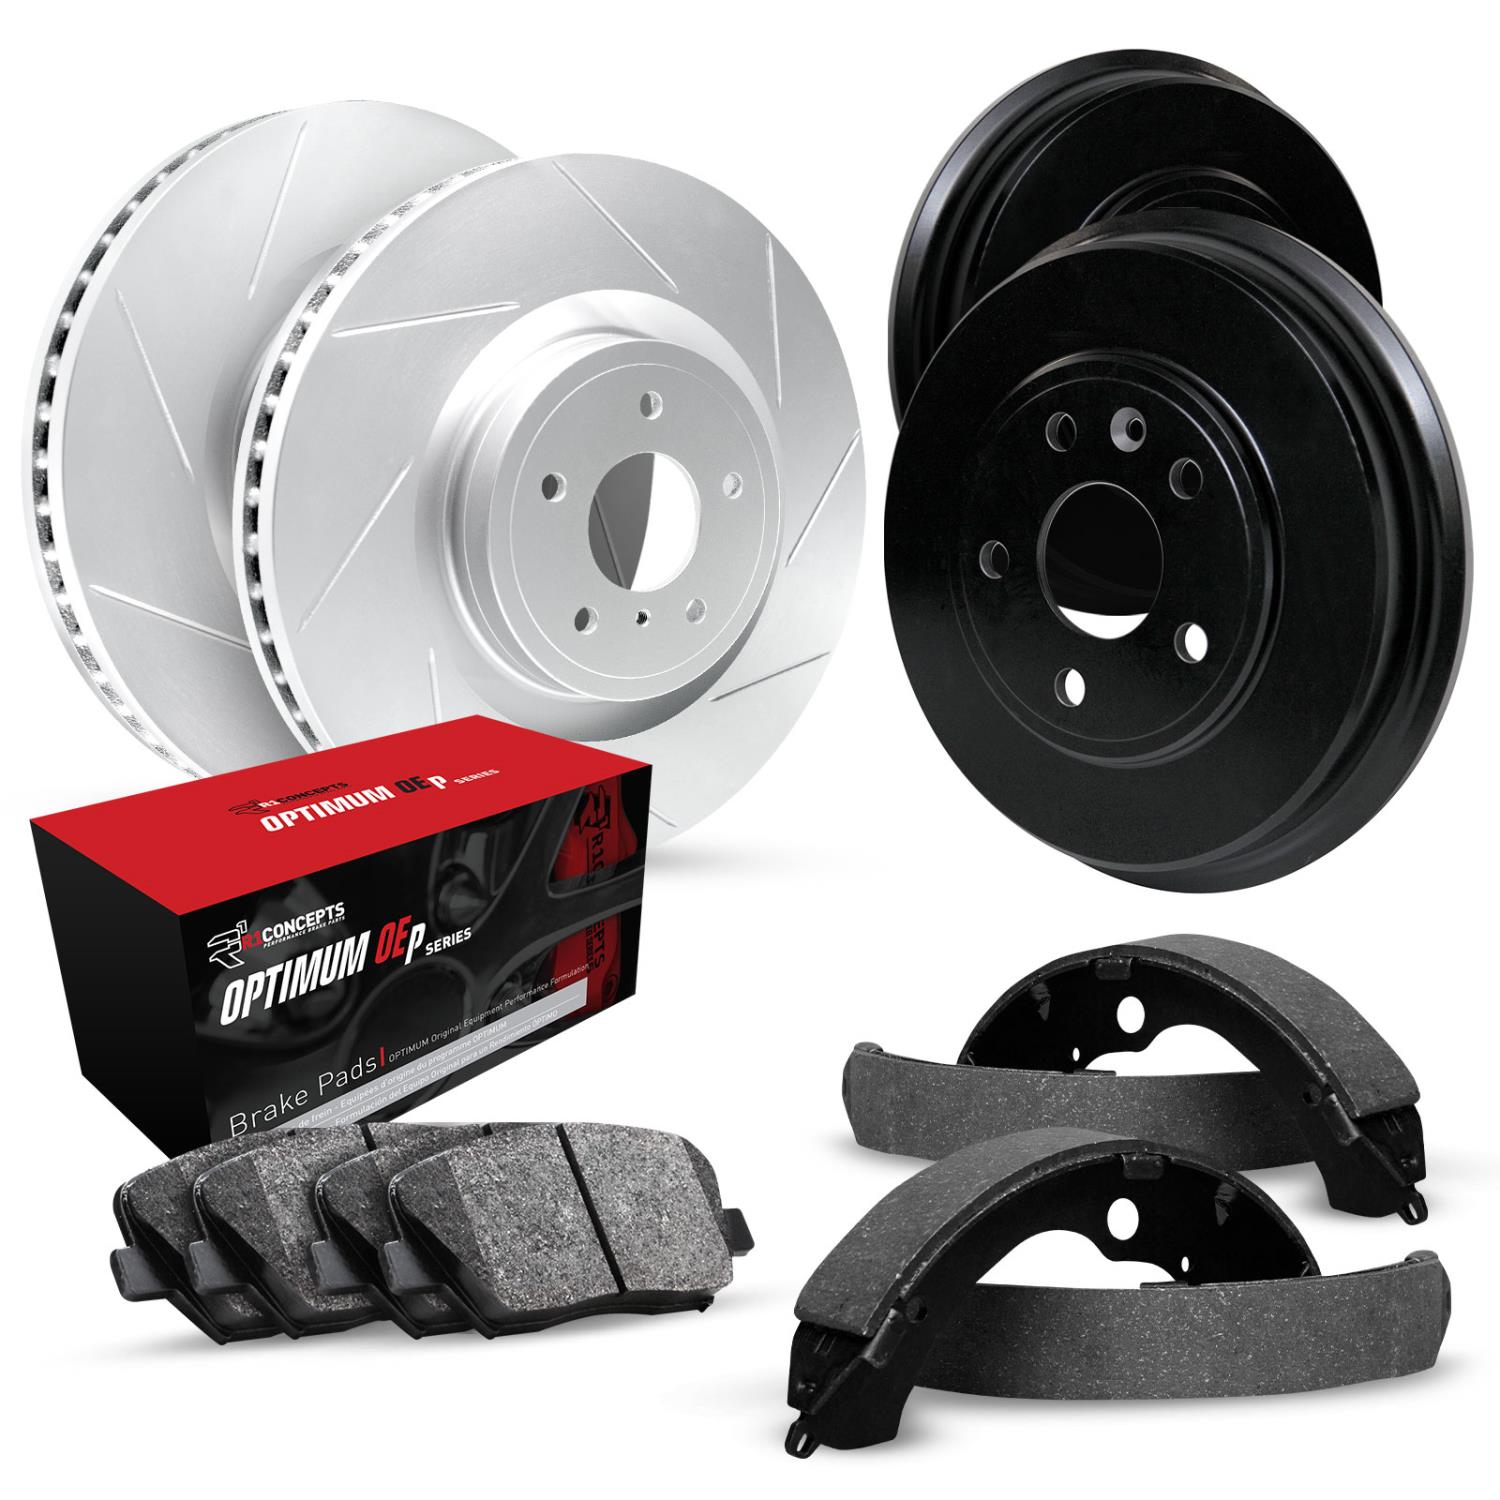 GEO-Carbon Slotted Brake Rotor & Drum Set w/Optimum OE Pads & Shoes, 2002-2007 Mitsubishi, Position: Front & Rear